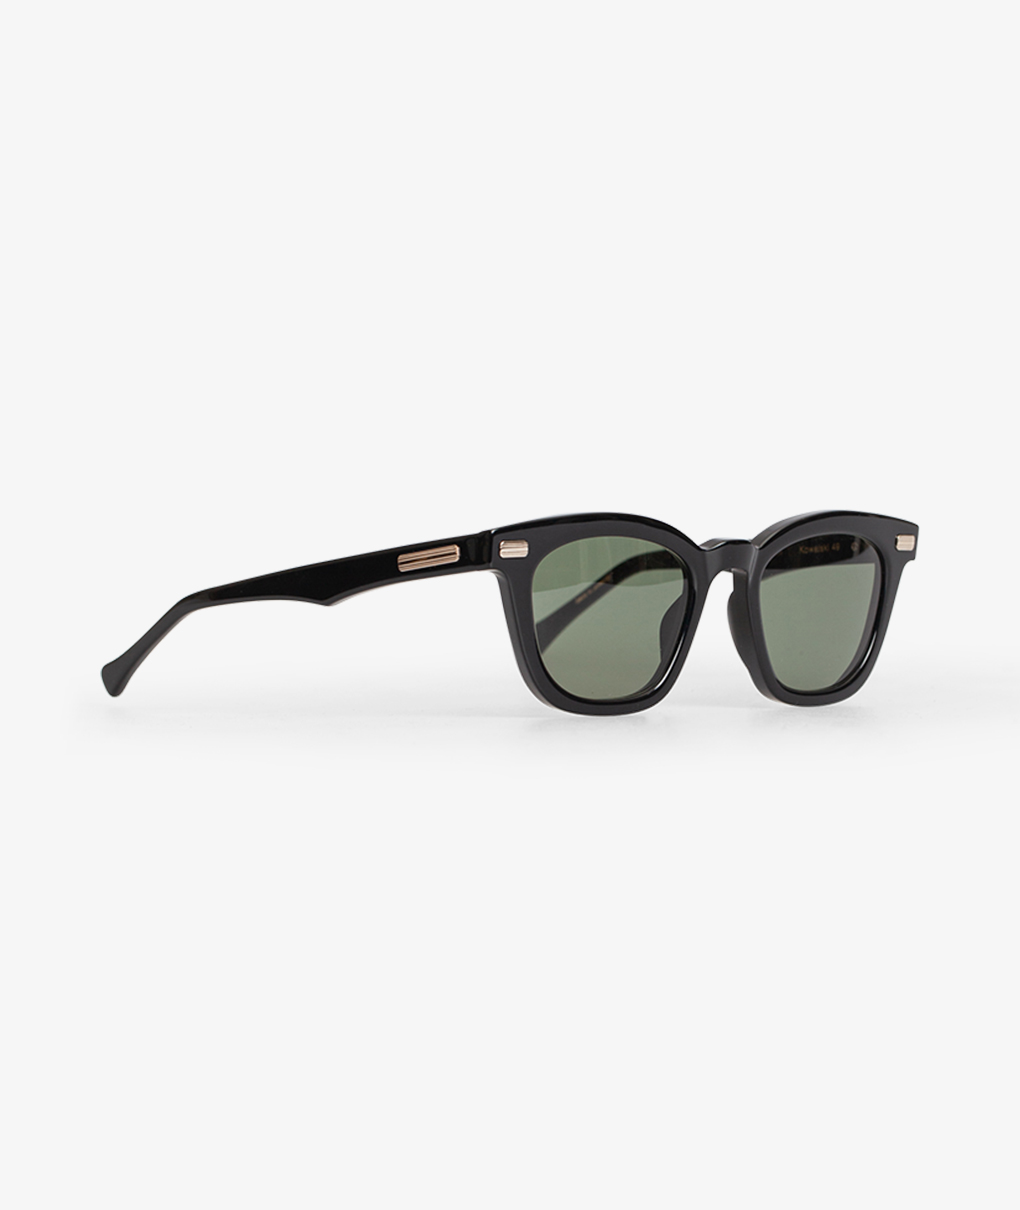 Norse Store | Shipping Worldwide - Sunglasses - Native Sons 